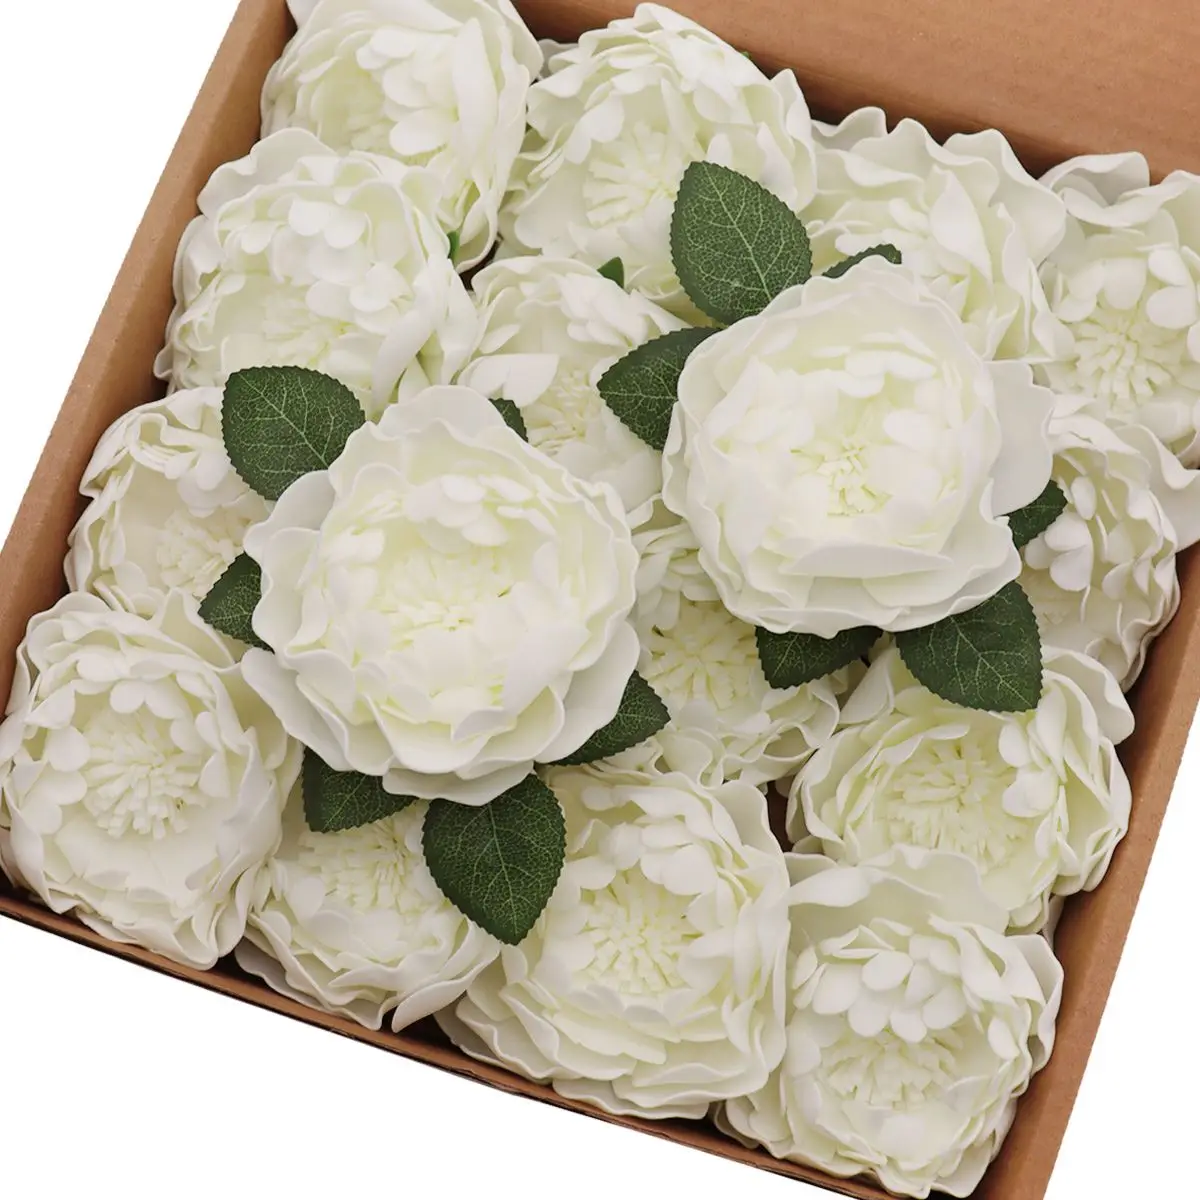 

16/32pcs Ivory Blooming Artificial Peonies Flower Real Looking Fake Peony w/Stem DIY Wedding Bouquet Centerpieces Decoration